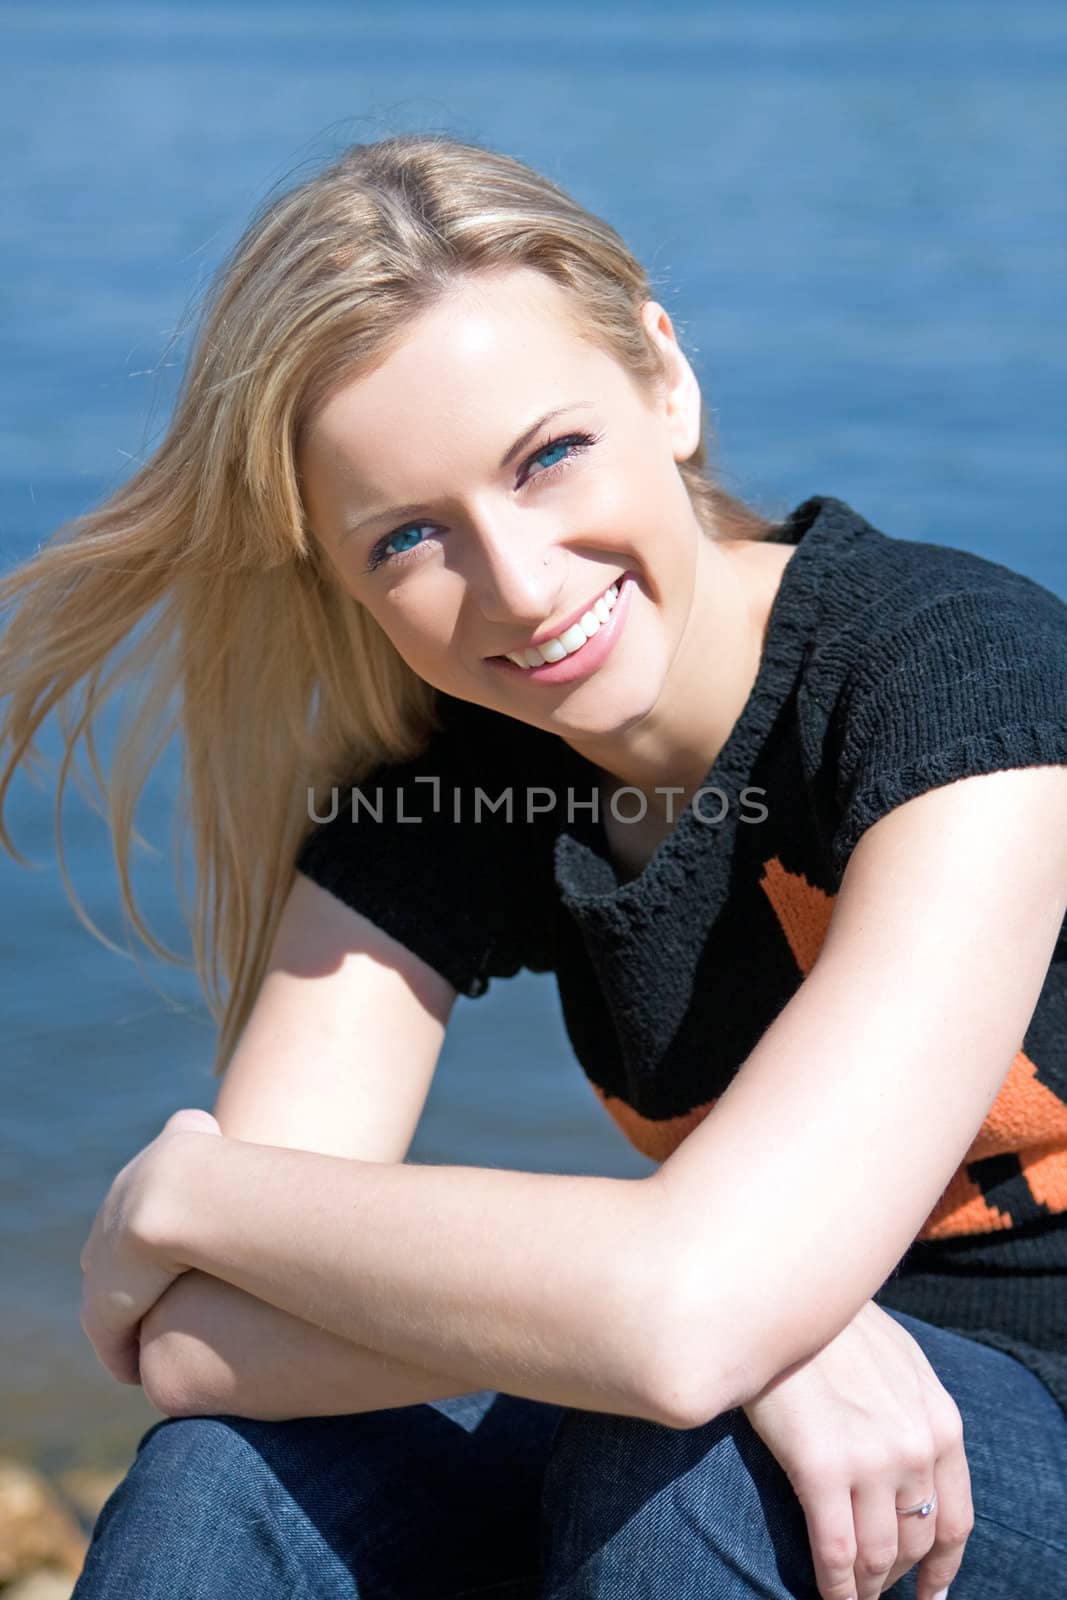 The beautiful girl on the bank of the river by MIL